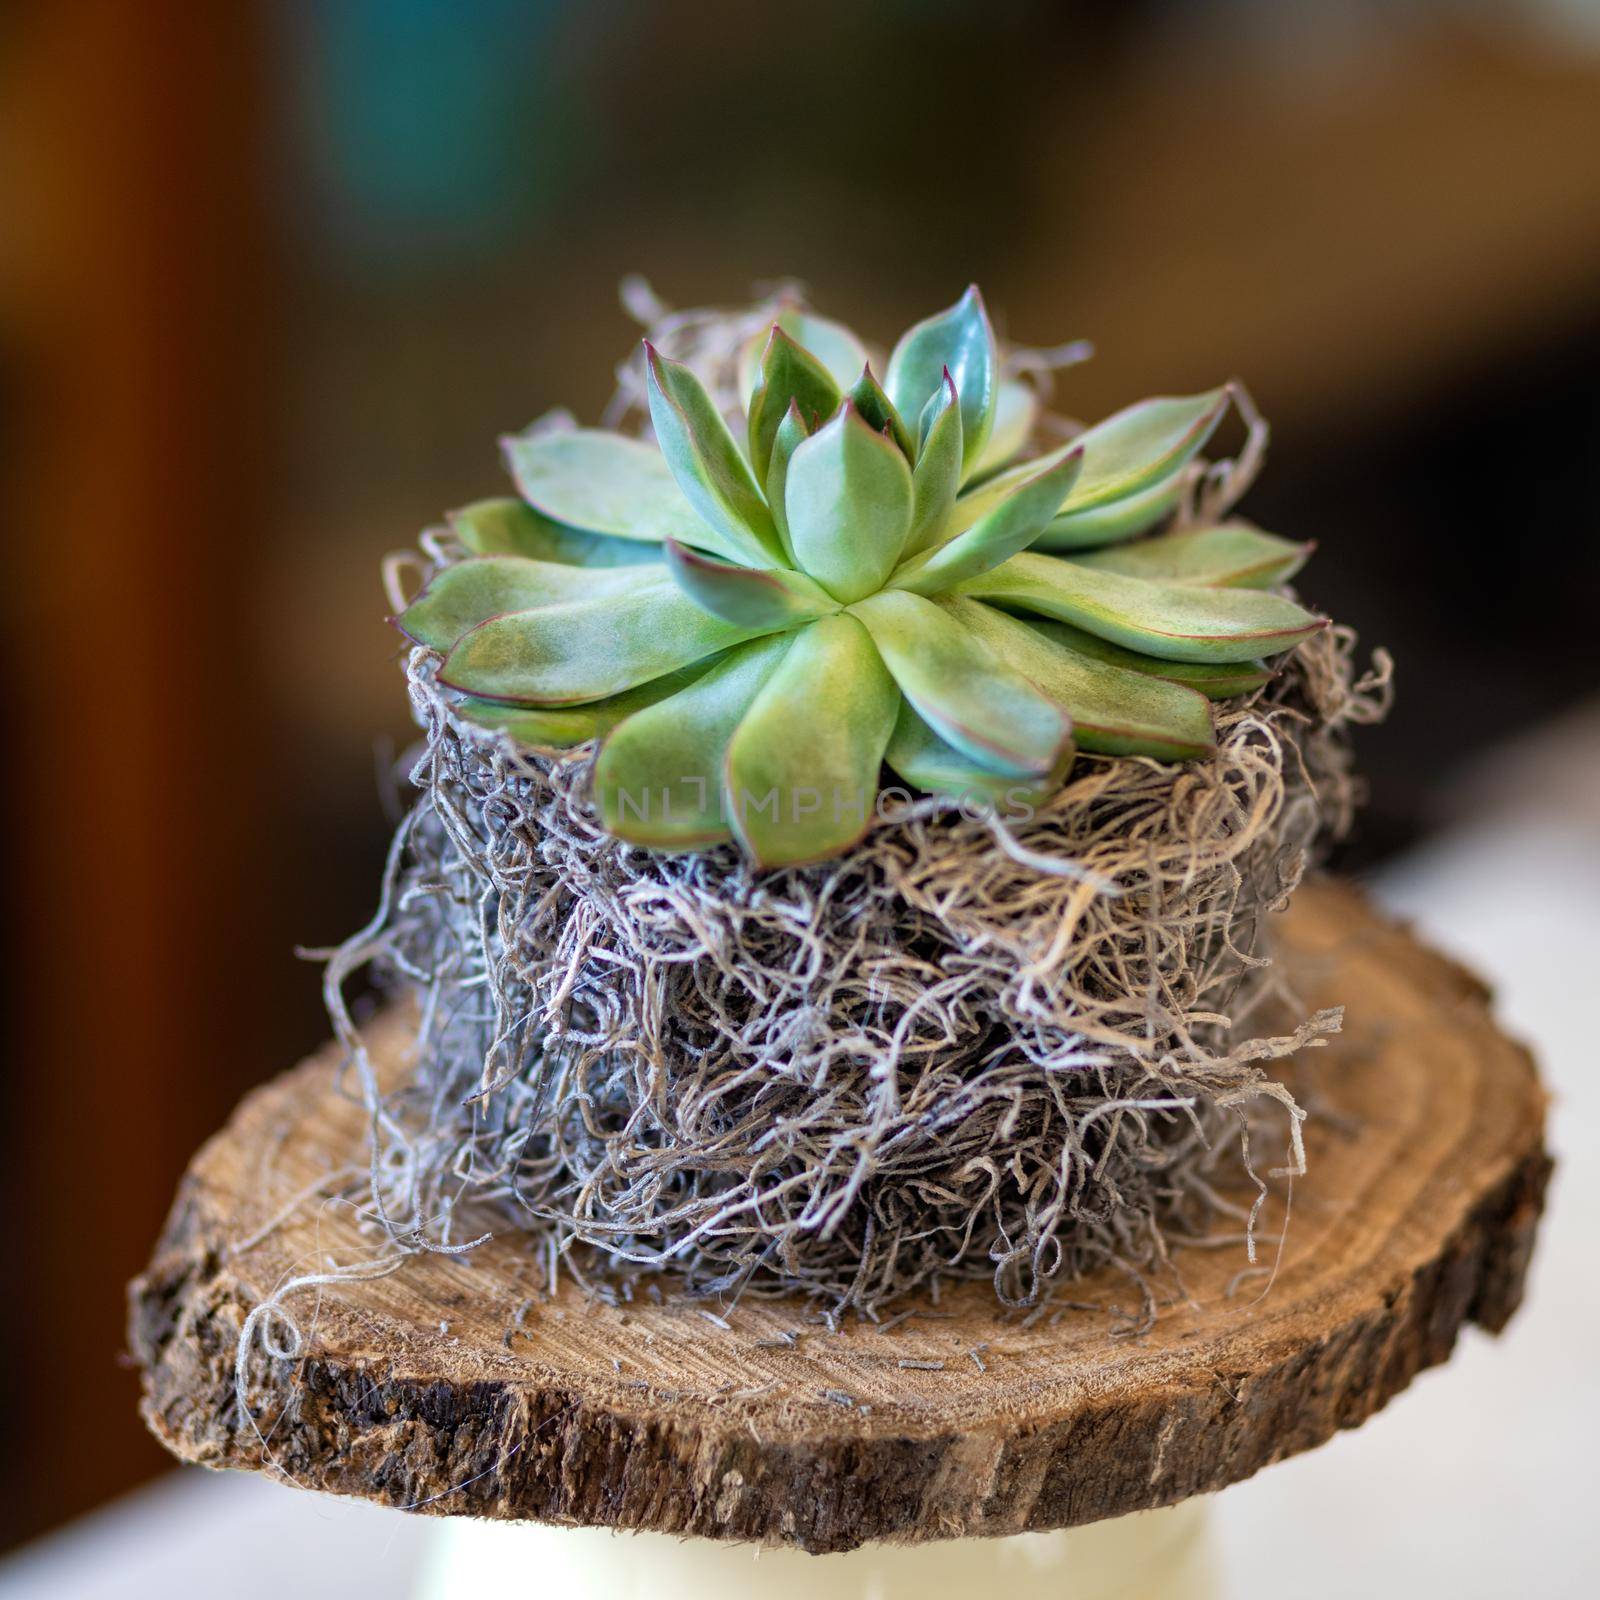 Small succulent on the wooden plate